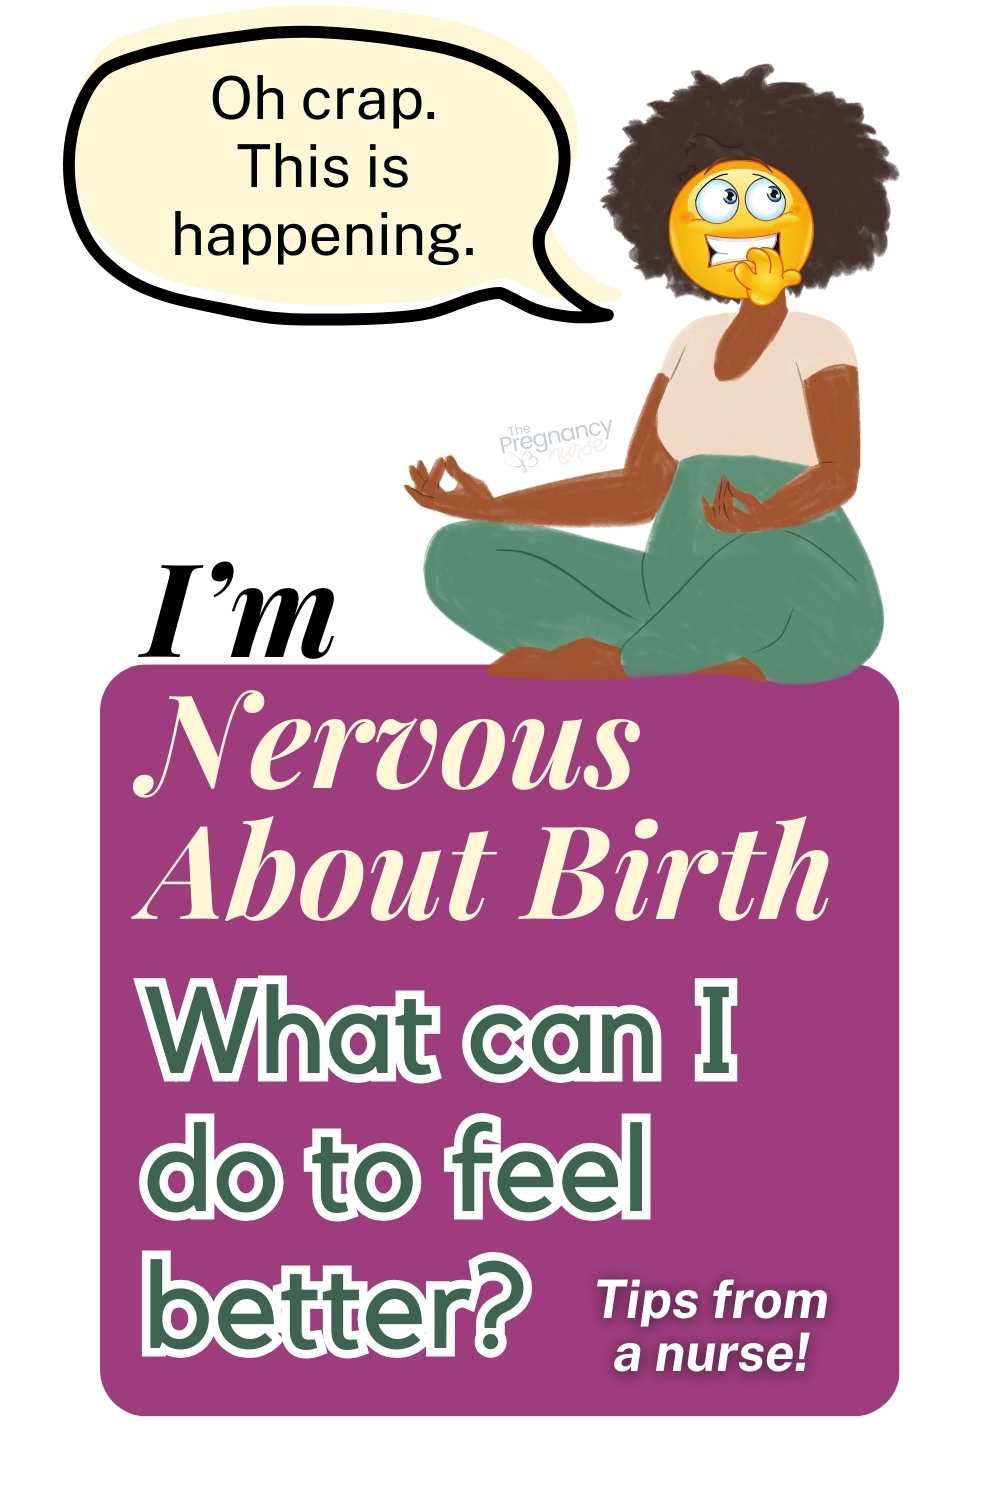 Feeling anxious about giving birth? Join us as we demystify some of the most common fears and give you confidence-building techniques to approach your birth day with excitement instead of dread. After all, it's about meeting your baby for the first time!